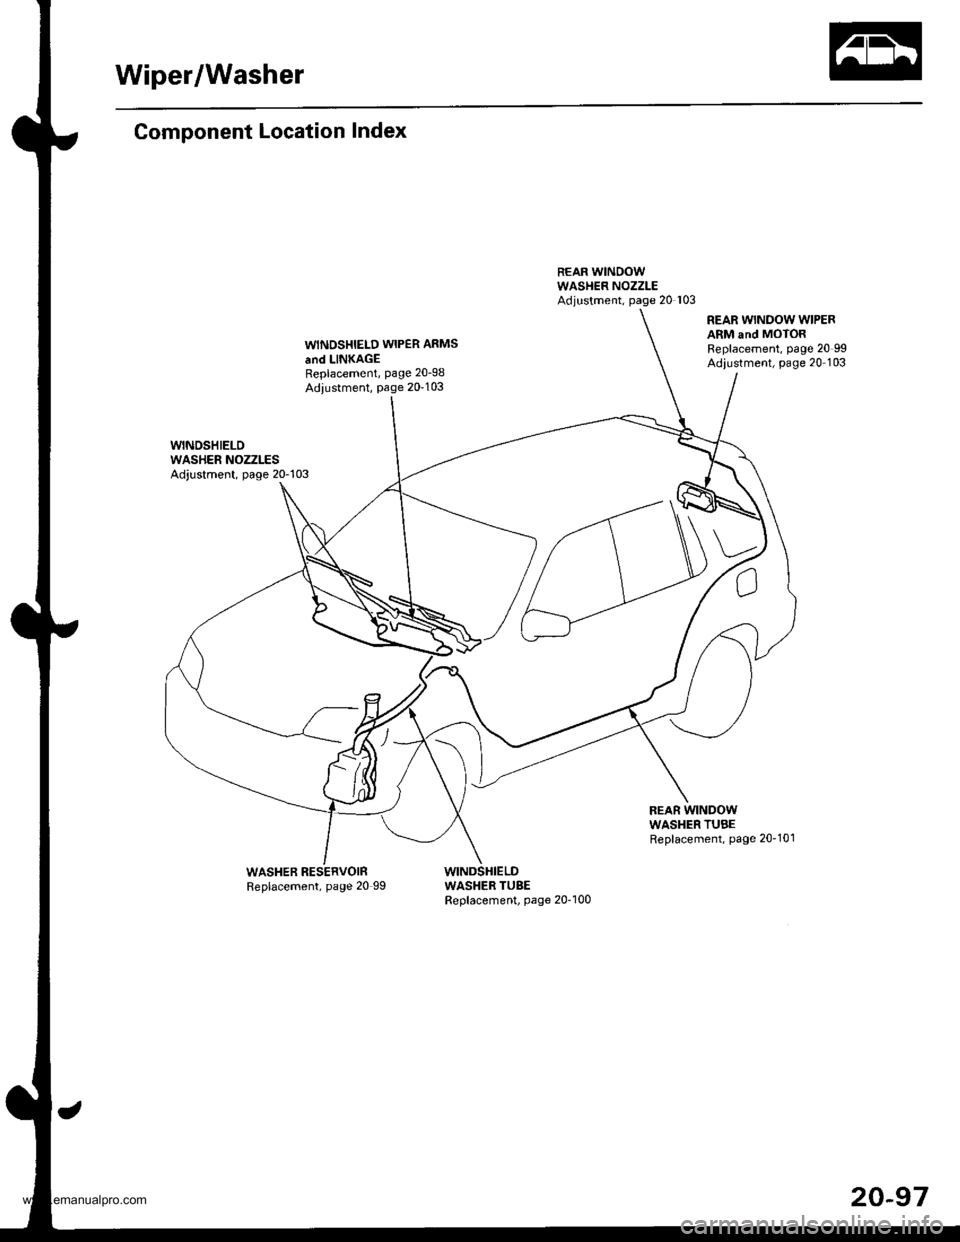 HONDA CR-V 1997 RD1-RD3 / 1.G Workshop Manual 
Wiper/Washer
Component Location Index
WINOSHIELD WIPER ARMS
and LINKAGEReplacement, page 20-98
Adiustment, Page 20-103
REAR WINDOW WIPERARM and MOTORReplacement, page 20 99Adiustment, page 20 103
WAS